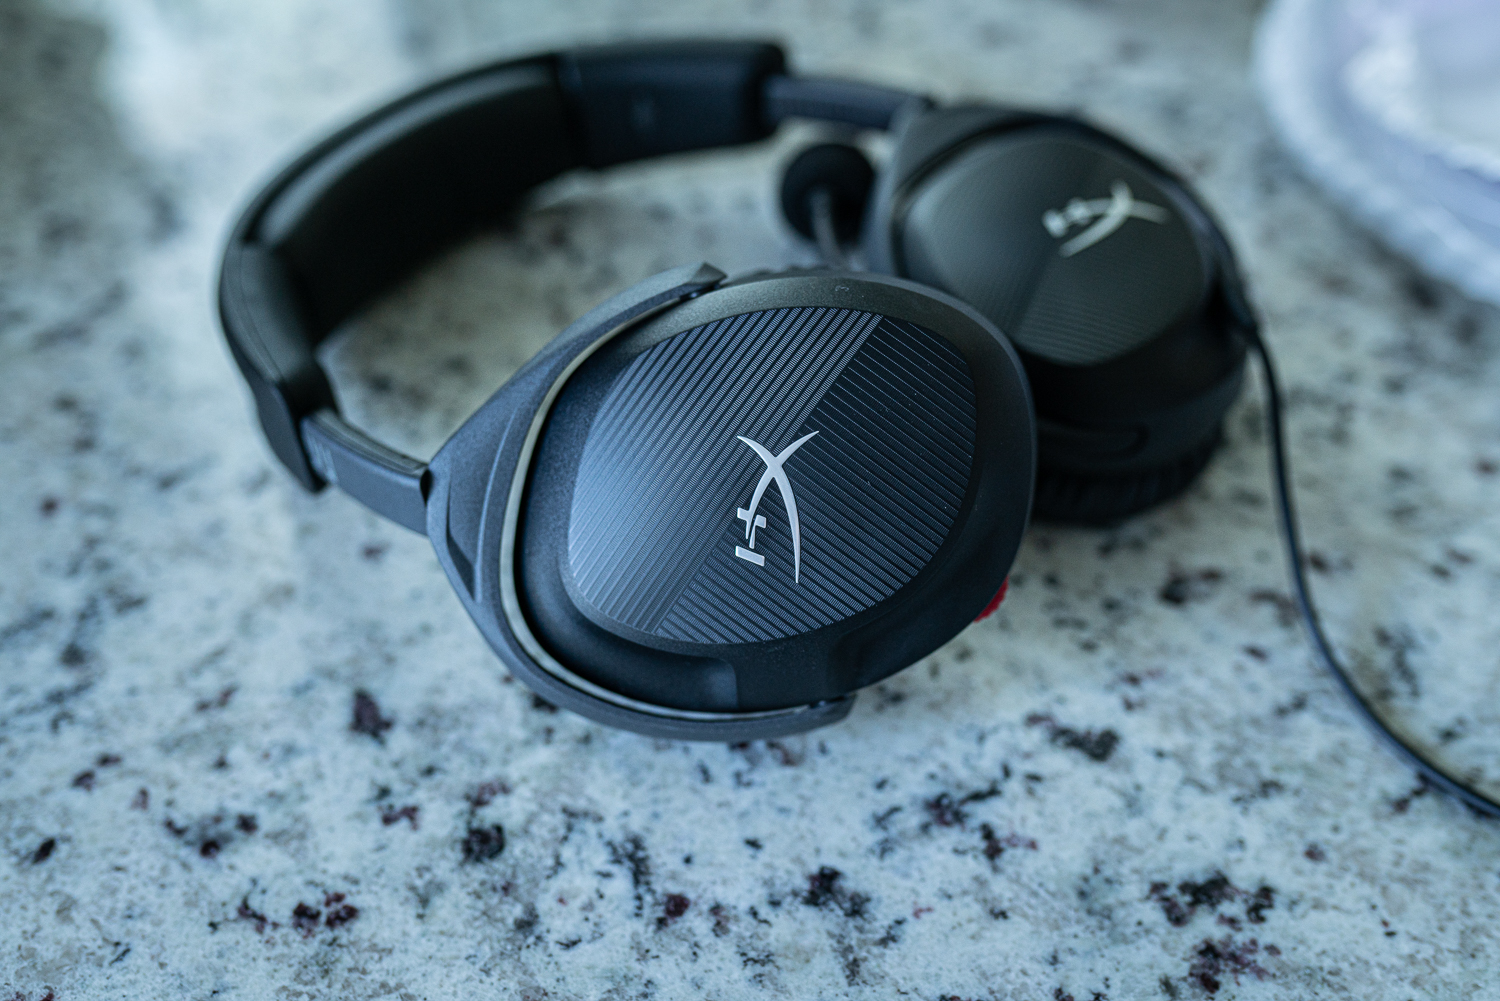 HyperX Cloud III review - the next generation of gaming headsets